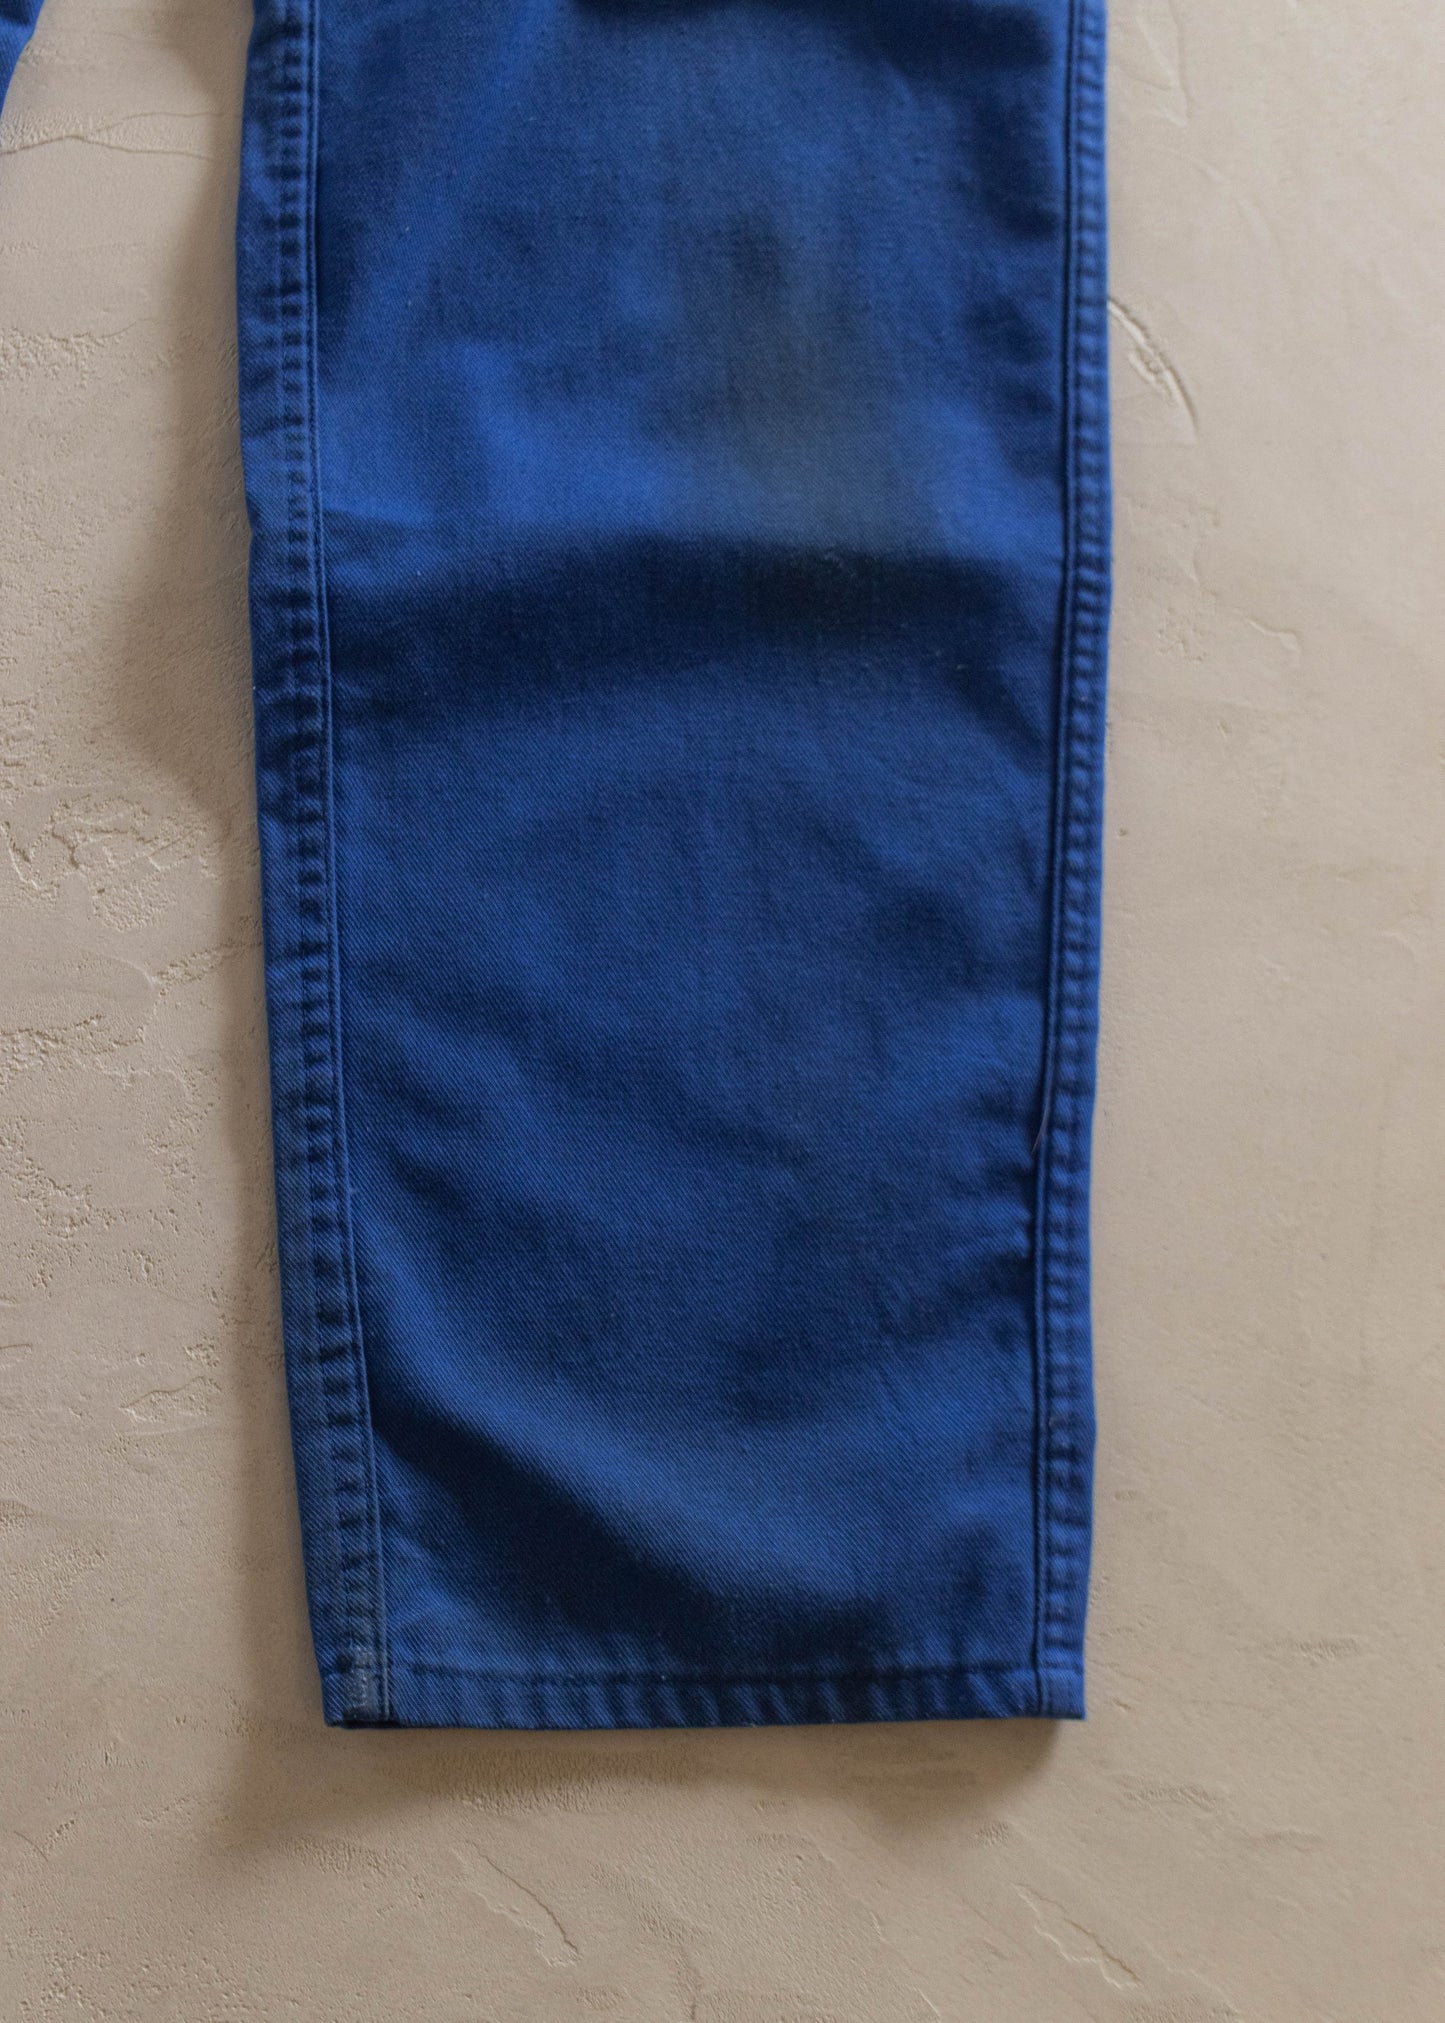 1980s L'ideal French Workwear Chore Pants Size Women's 30 Men's 32